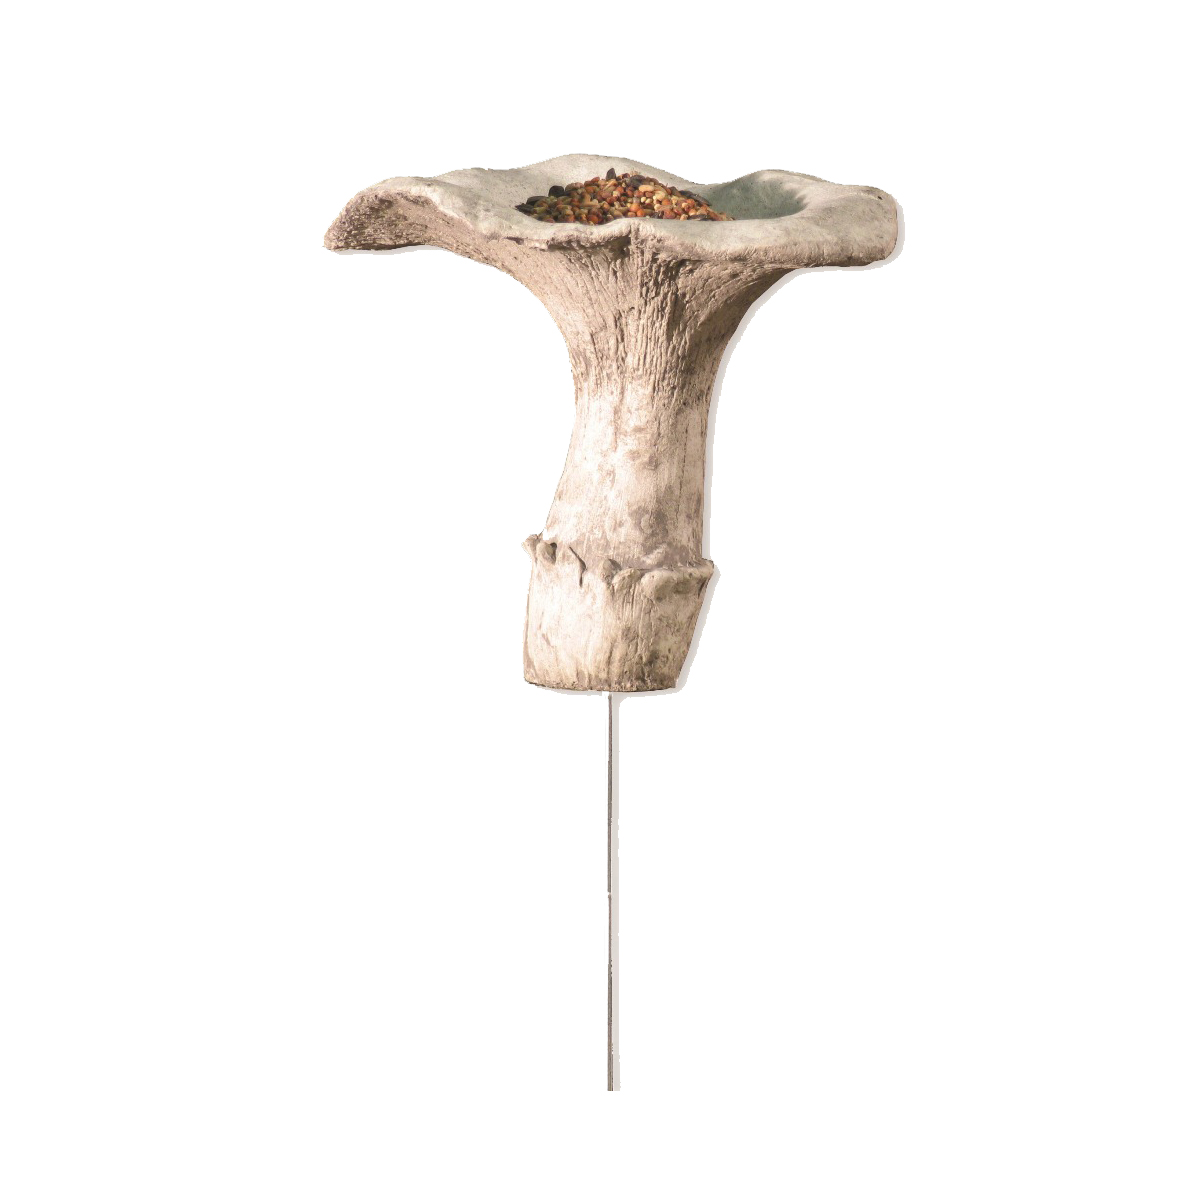 Featured image for “Mushroom Waterer”